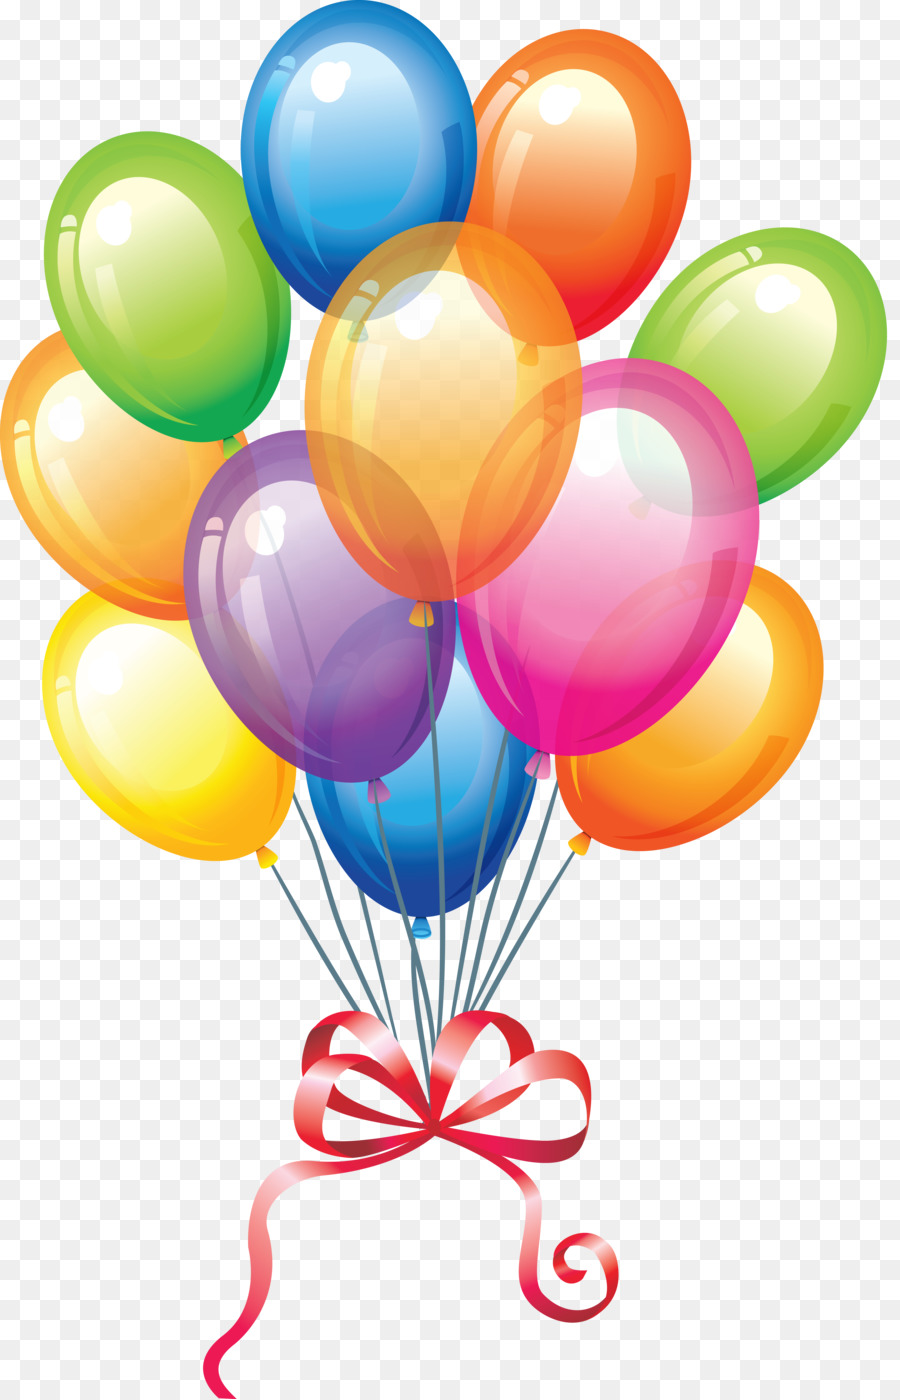 Party Balloons clipart.